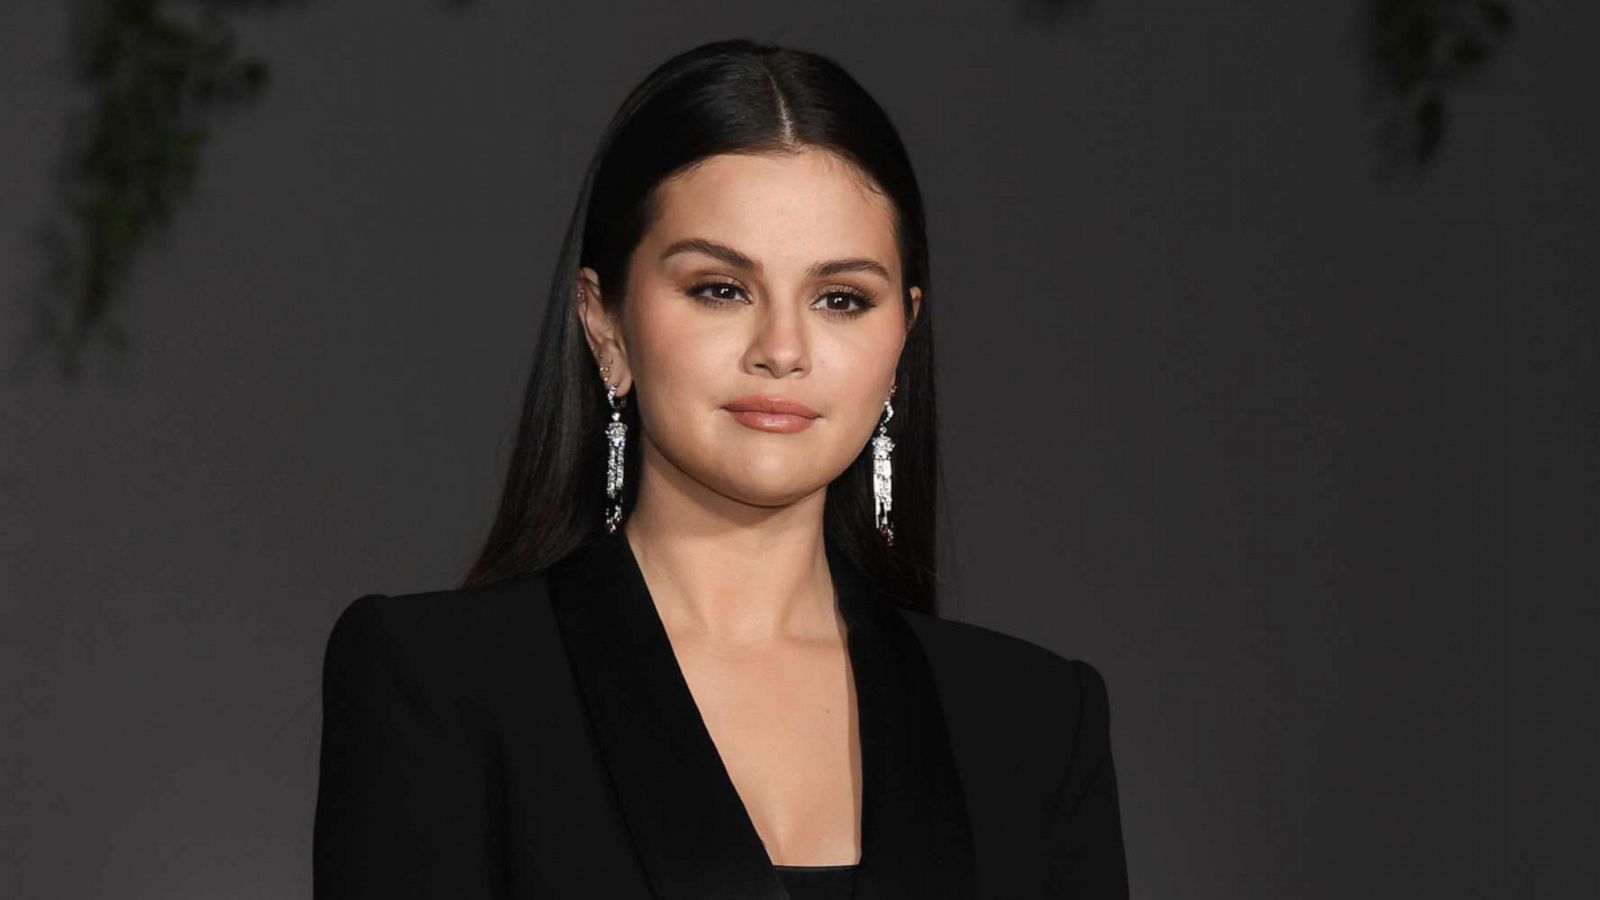 Selena Gomez Launches Line to Support Mental Health – The Wildcat